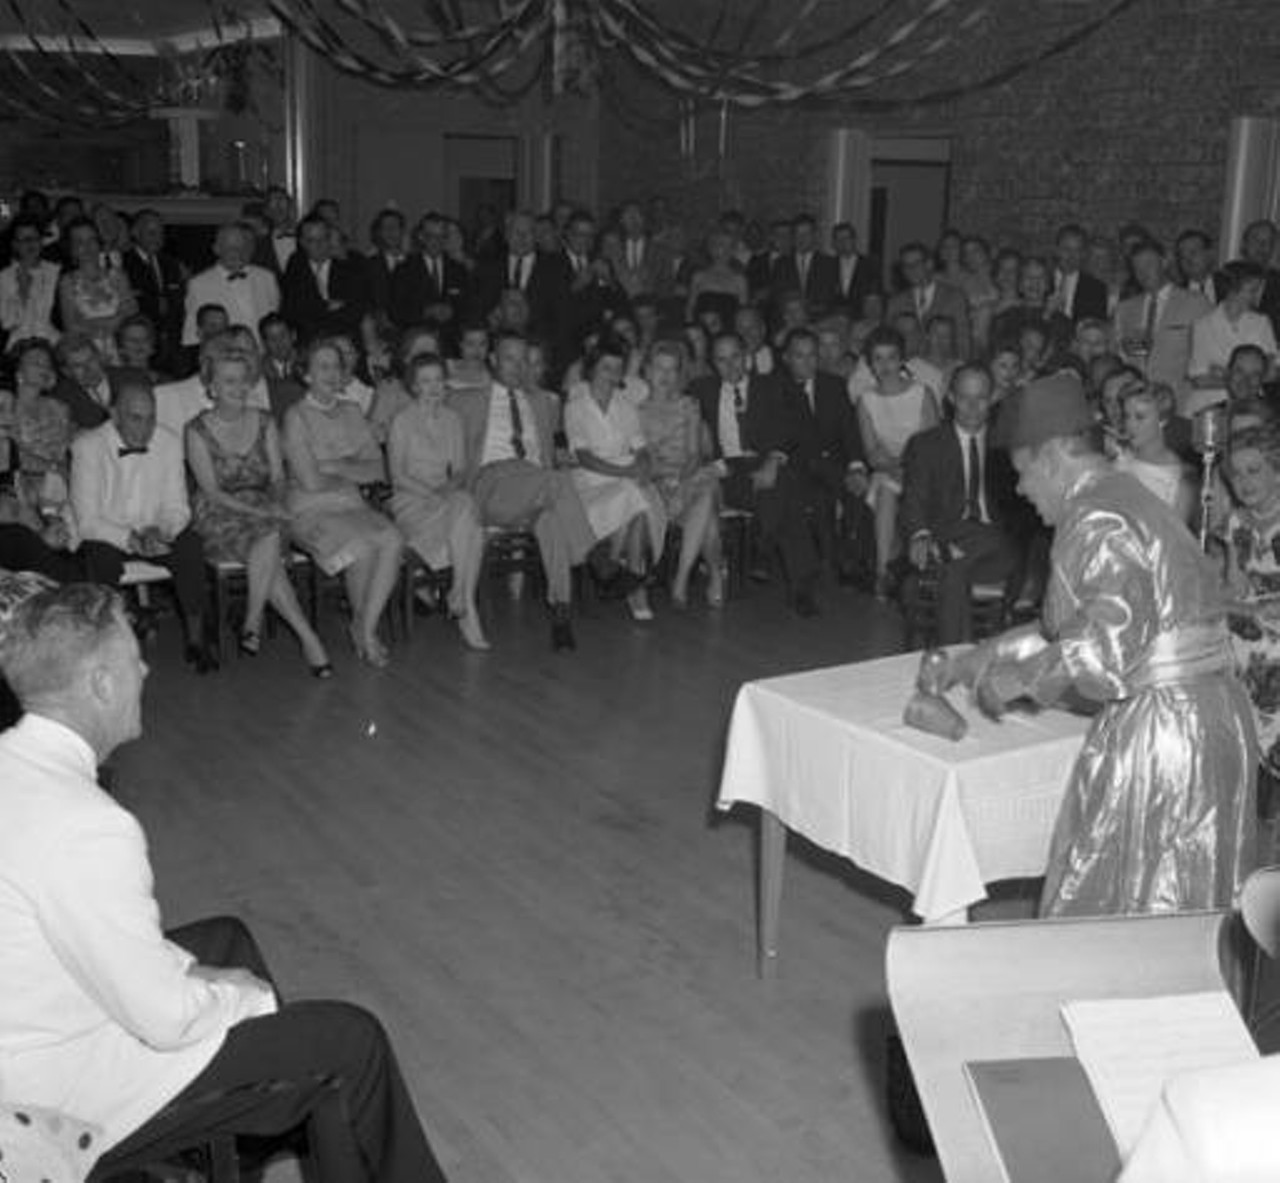 Magician Performing for the Oak Hills Country Club, 1959
The Oak Hills Country Club has been part of San Antonio since 1921, having been originally named “Alamo Country Club.” After it reopened after the Great Depression and World War II, the name was changed to Oak Hills Country Club. Since then, the Country Club has been home to many events.
Photo via Zintgraff Studio Photo Collection